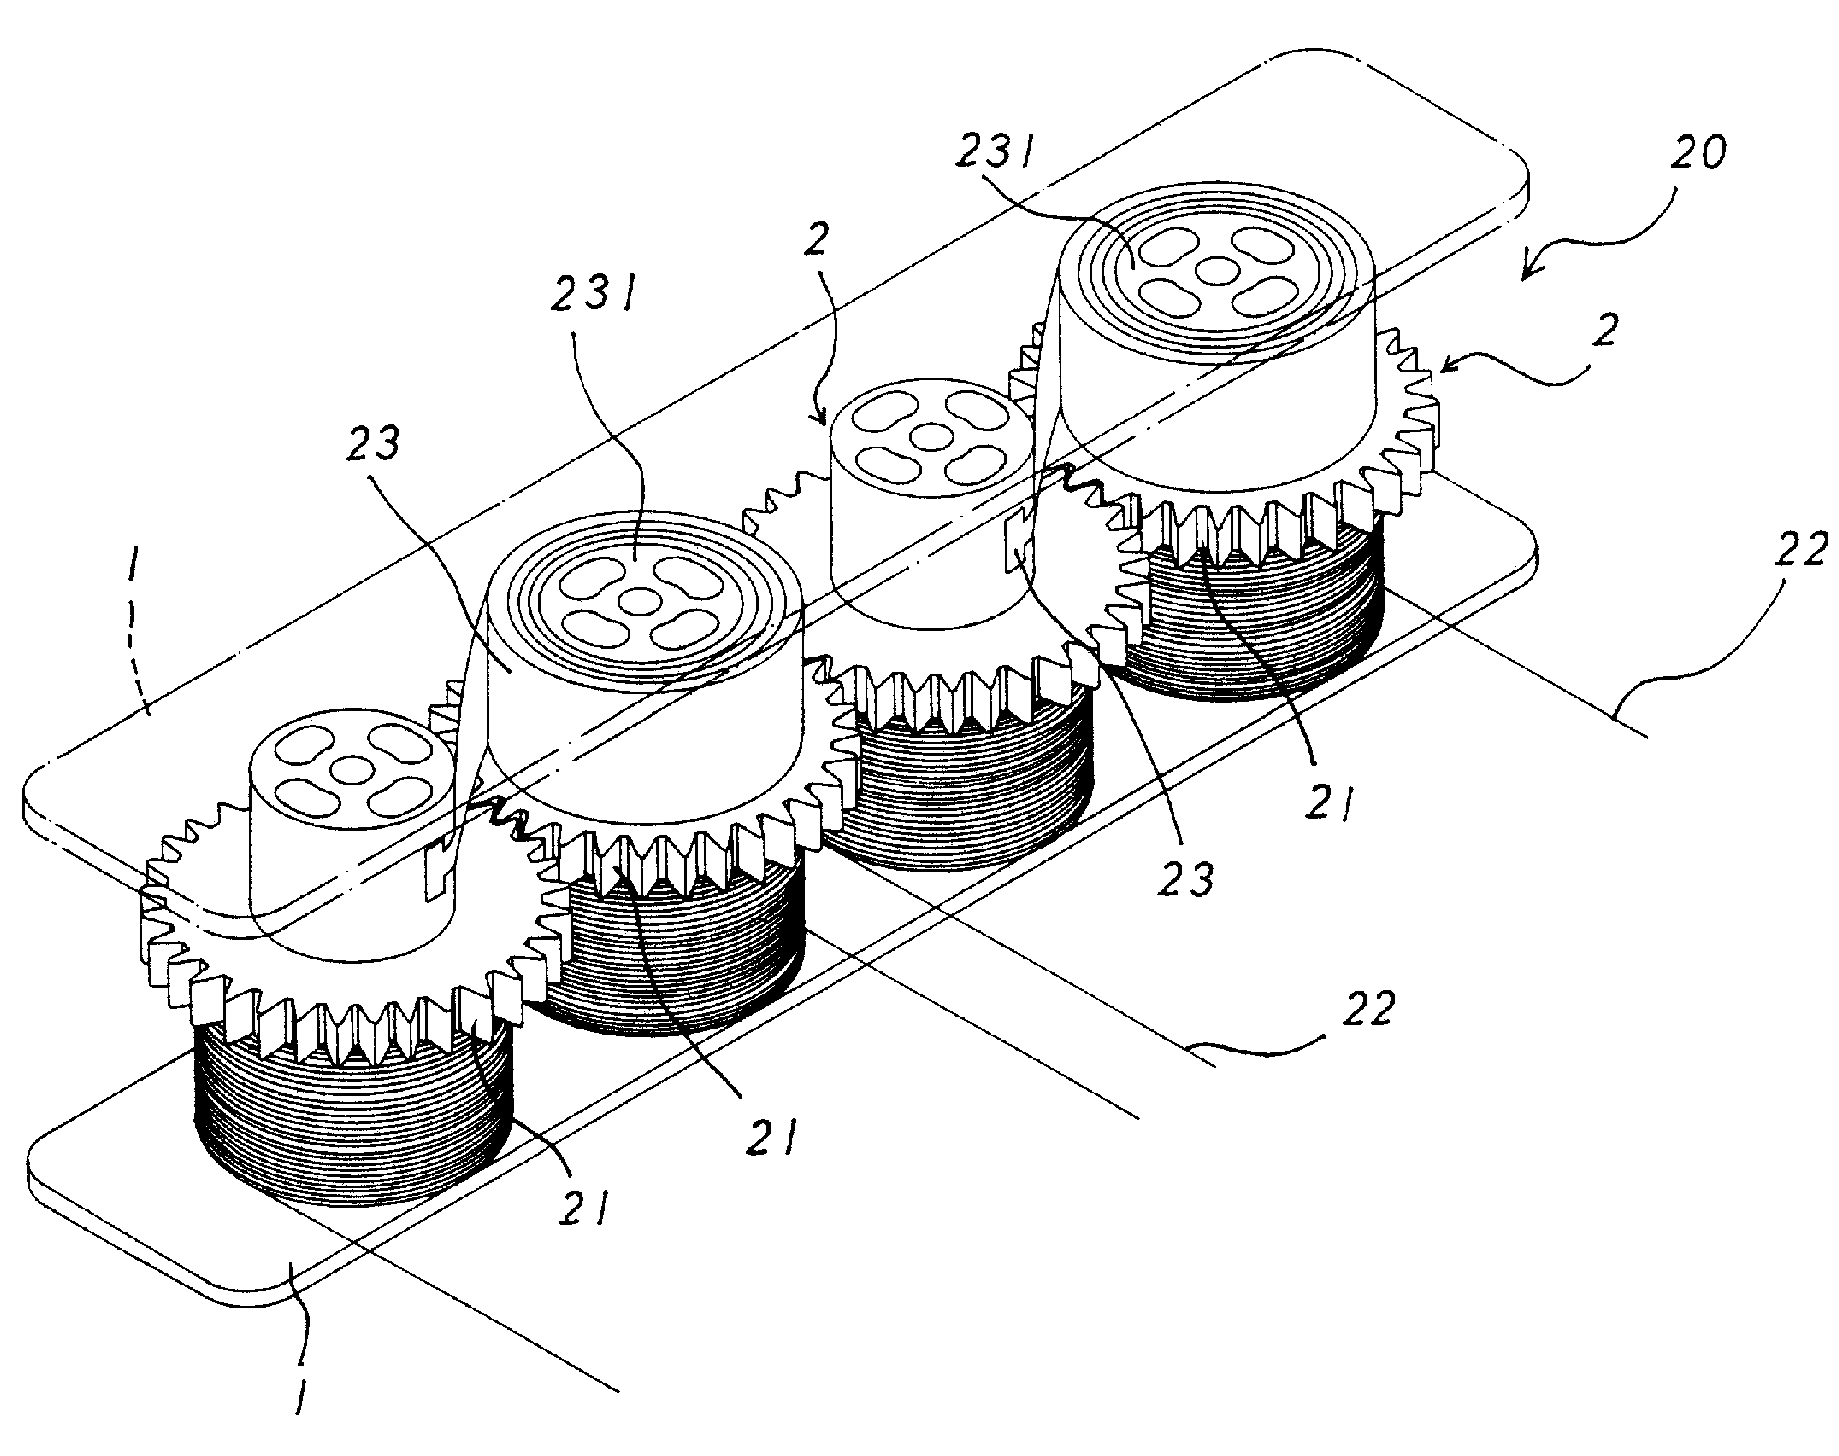 Reeling device for curtain cords